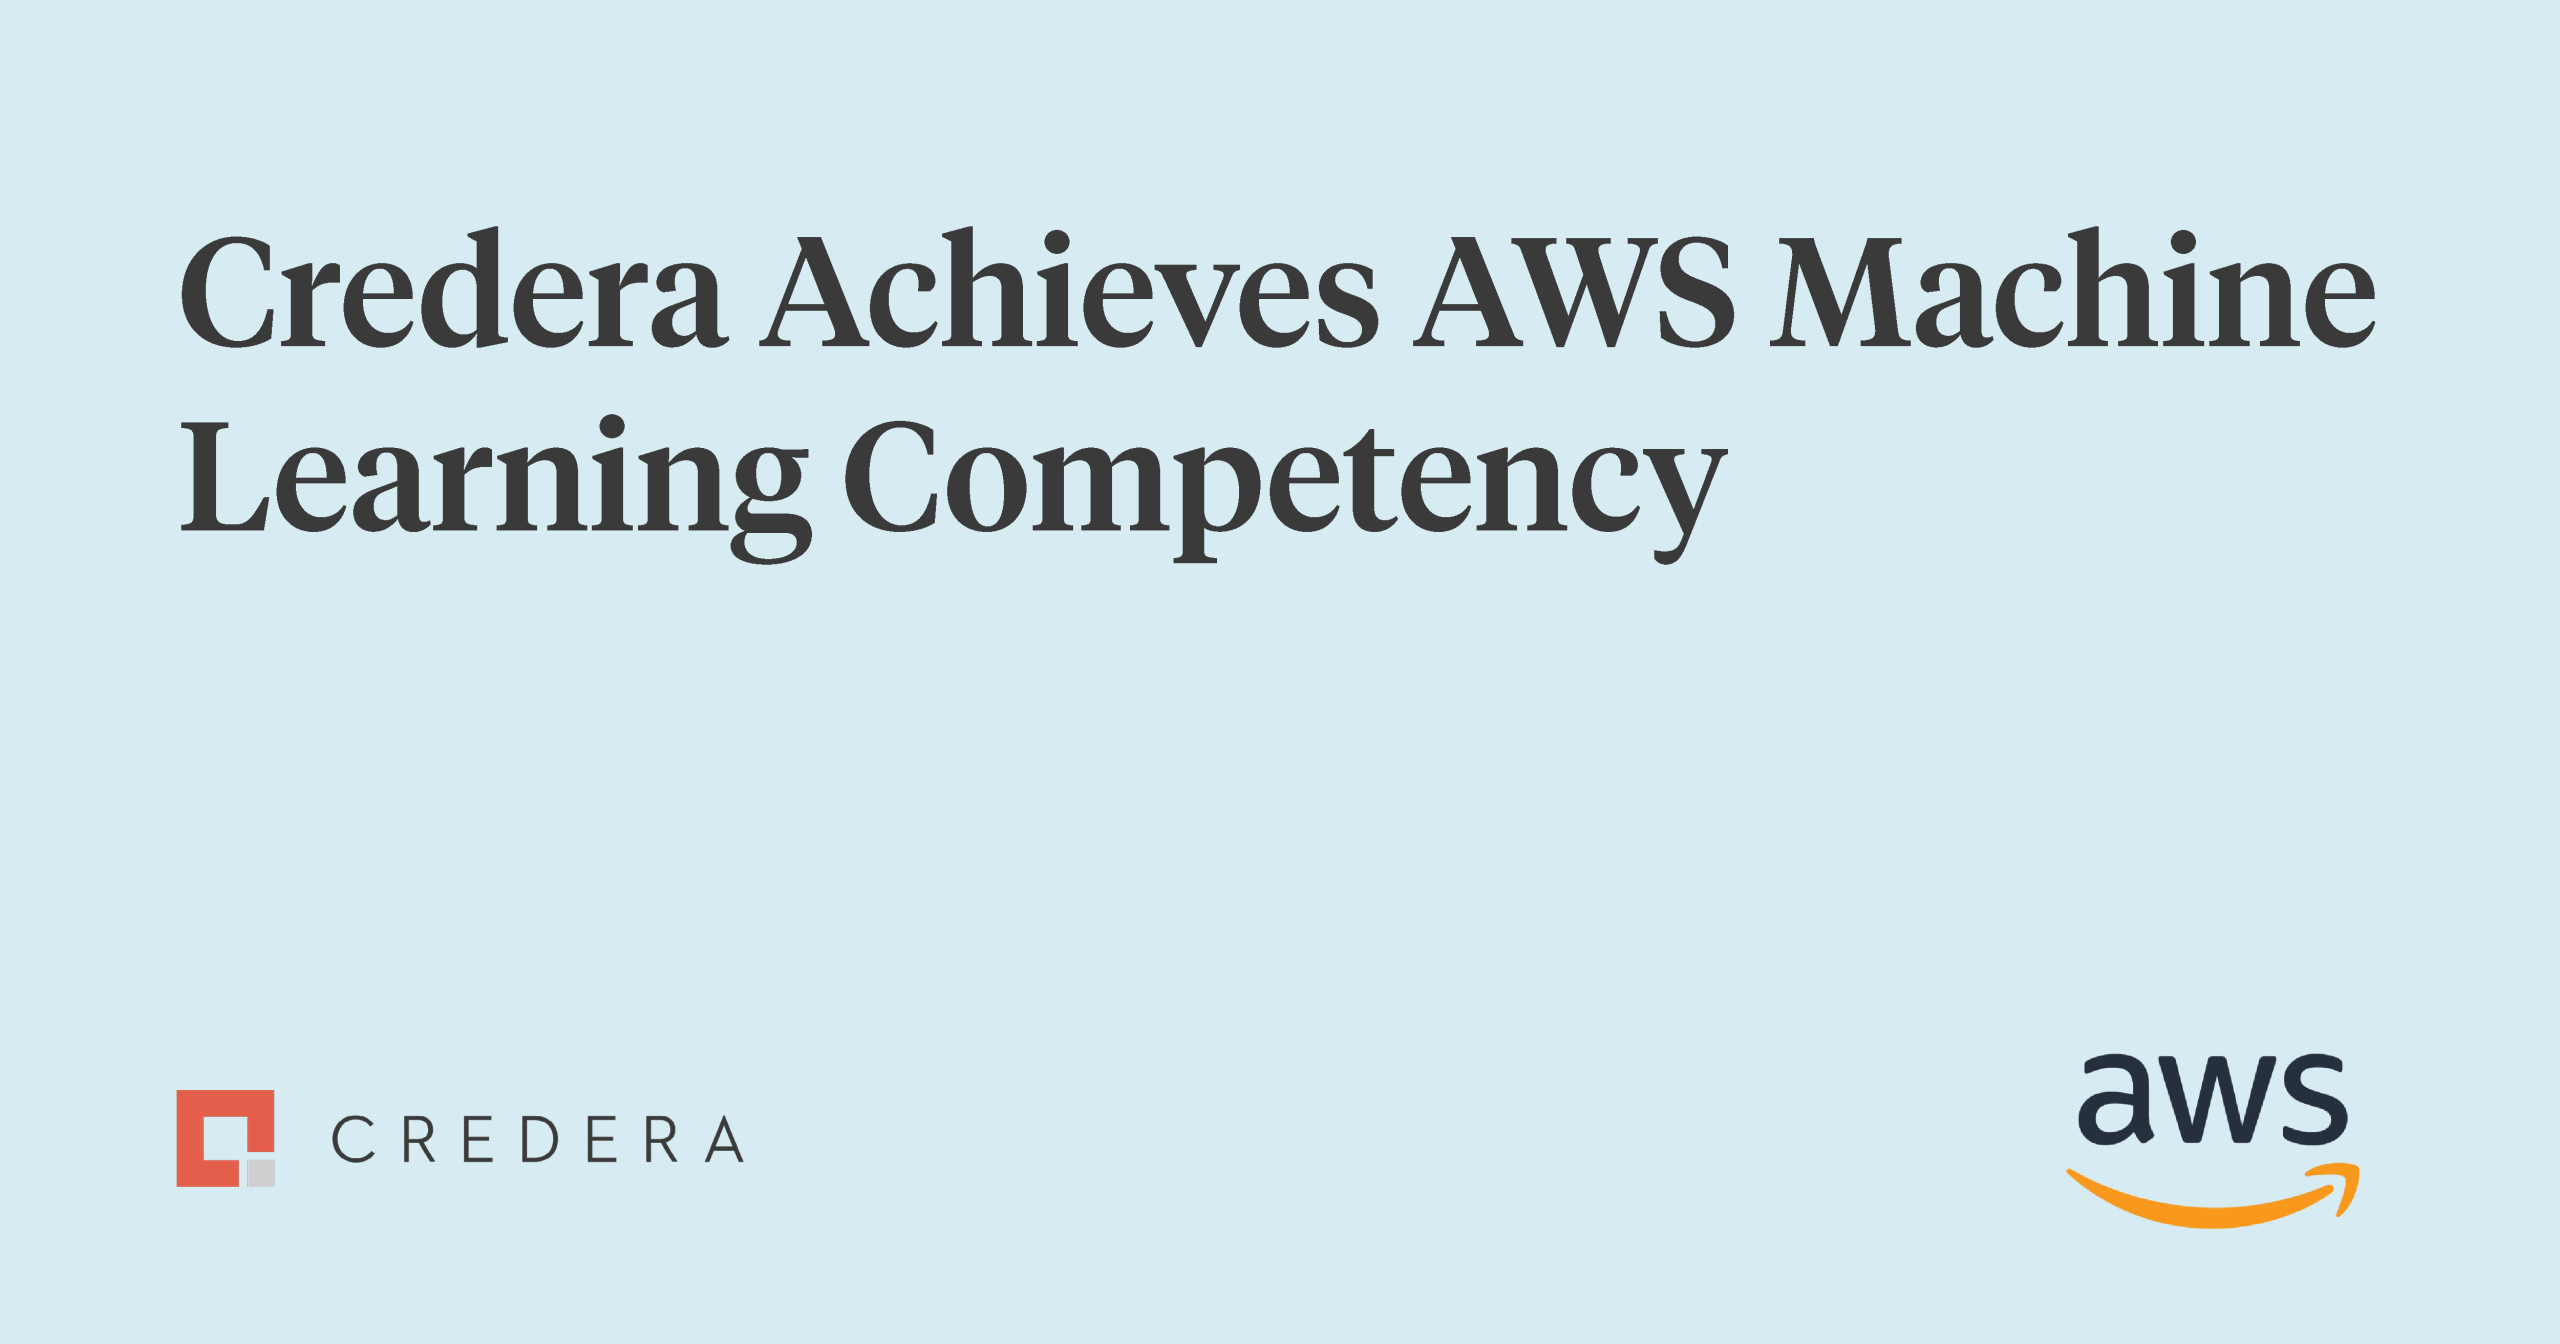 Credera Achieves AWS Machine Learning Competency